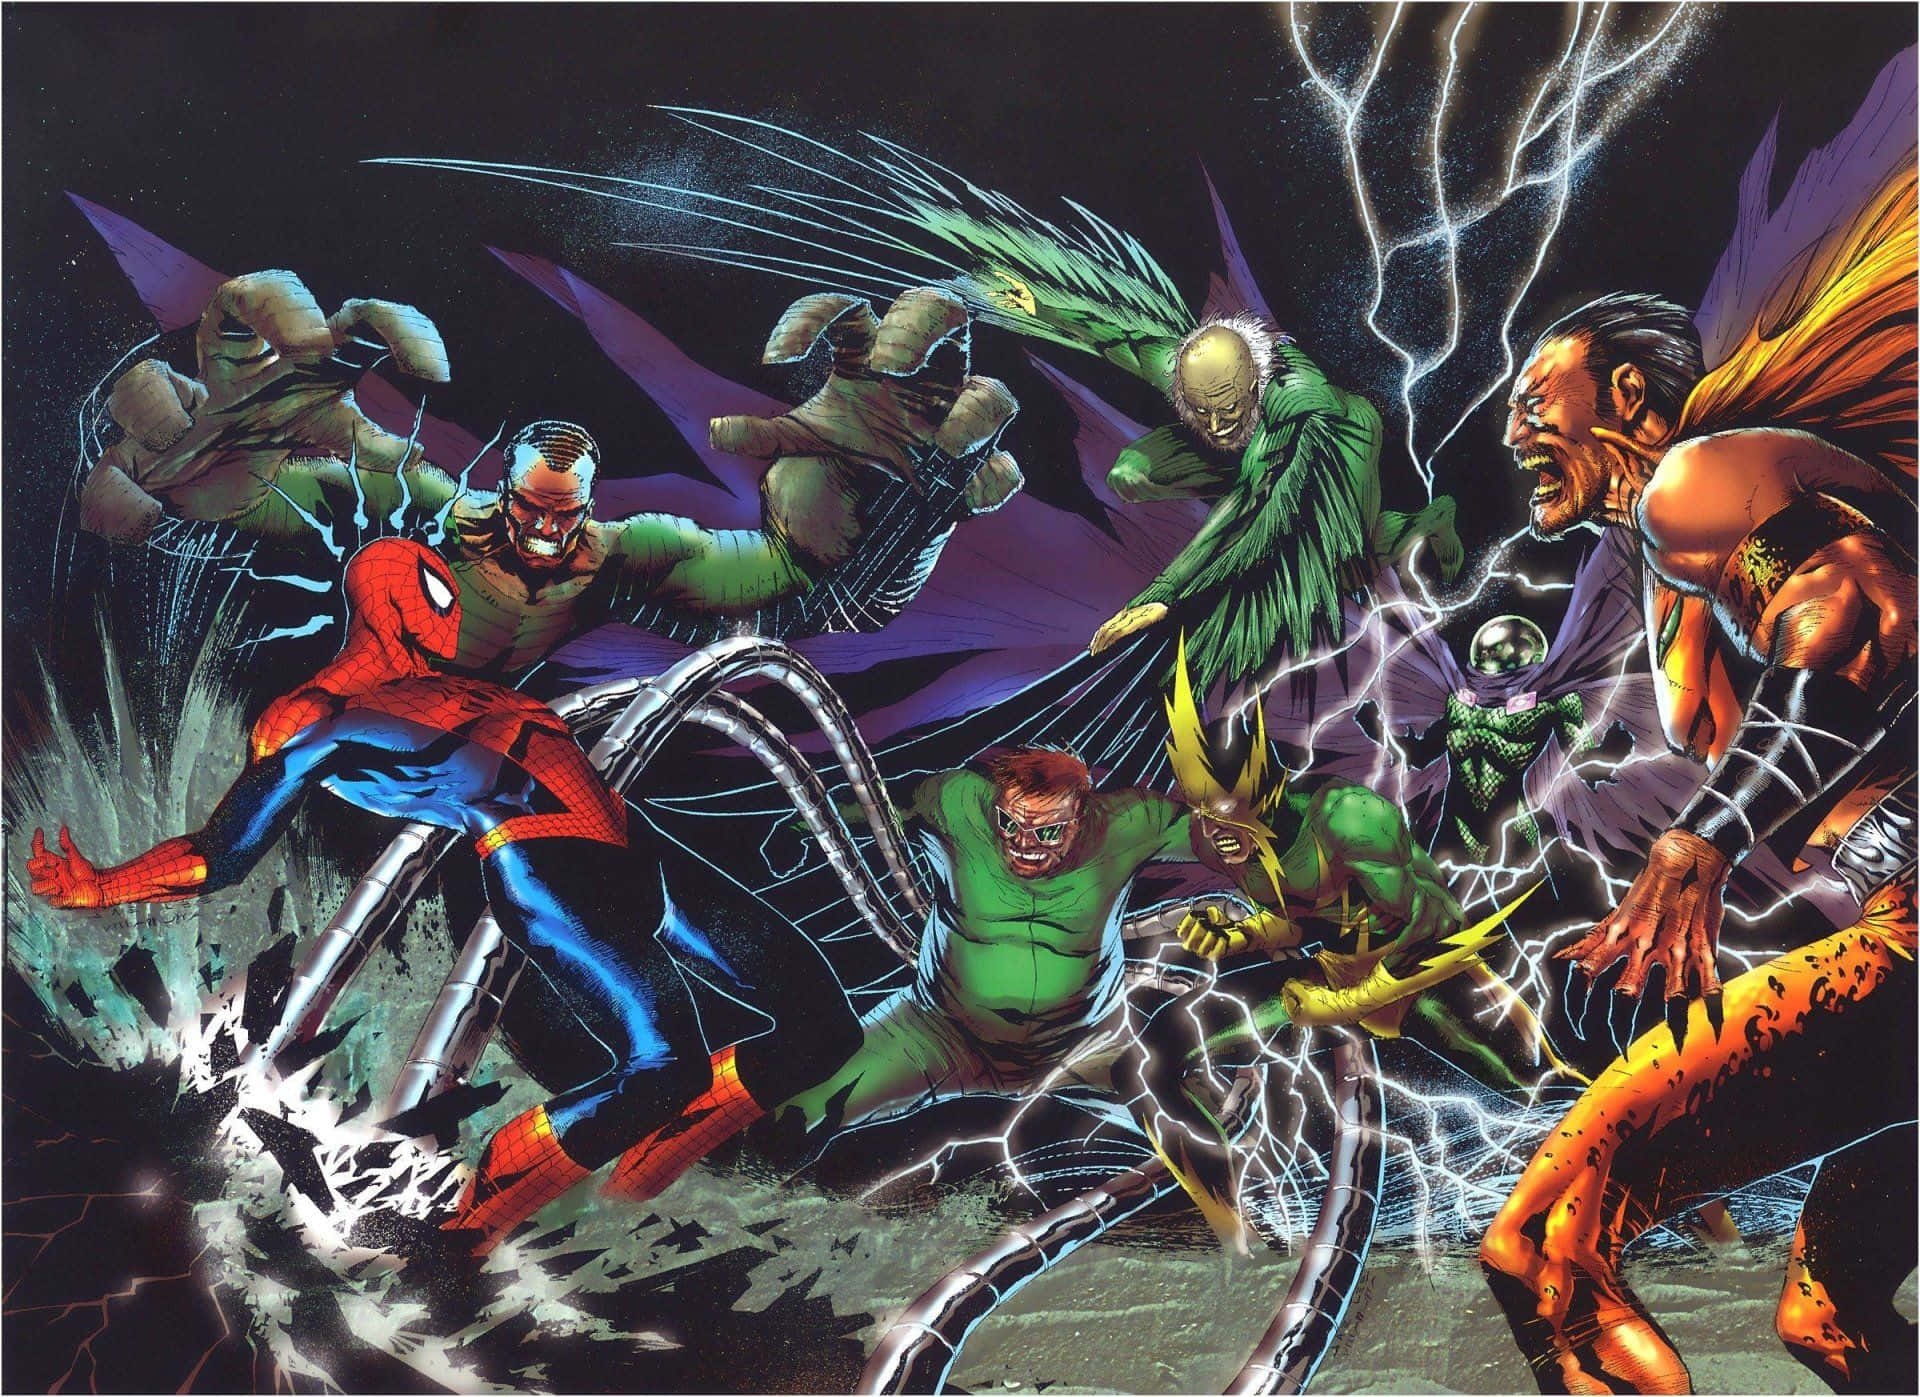 The Sinister Six Assemble in Action Wallpaper